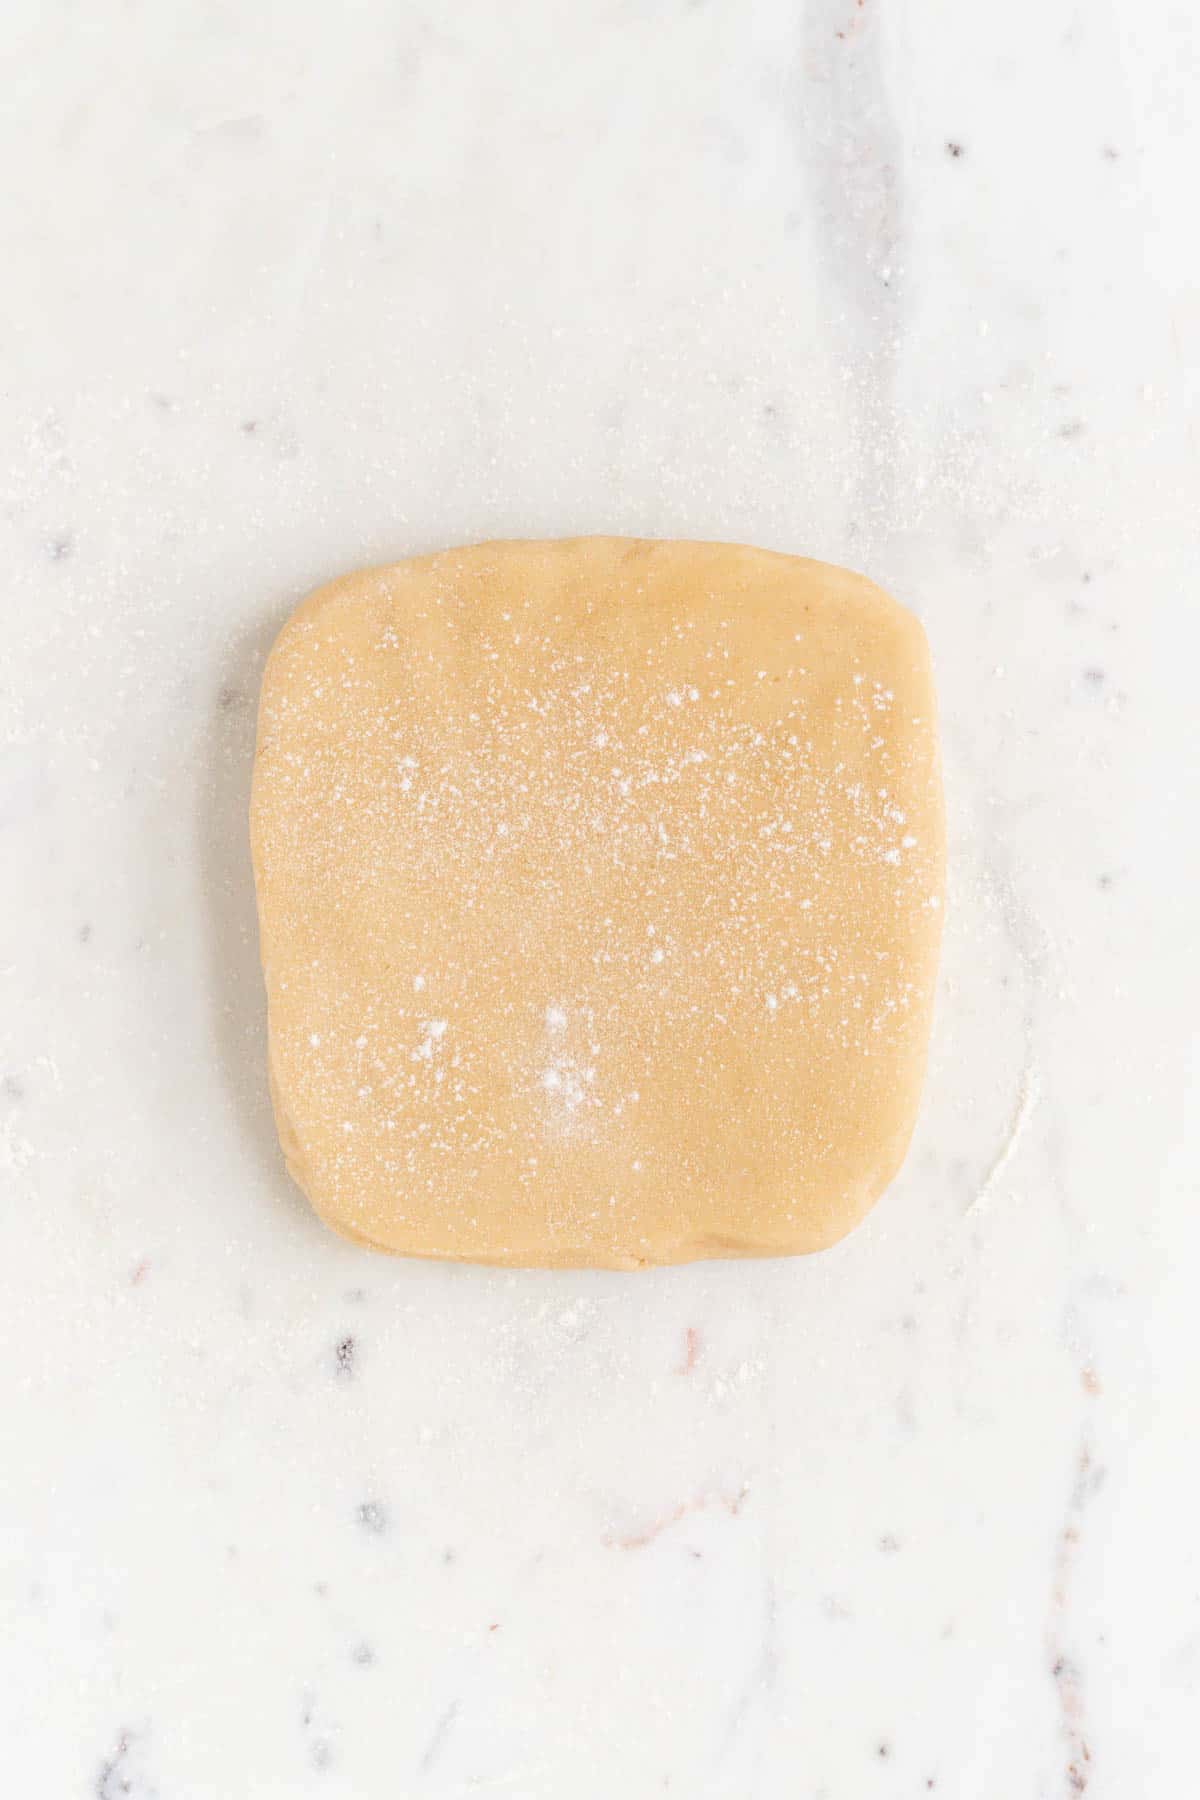 A square block of flowered cookie dough on a white marble surface